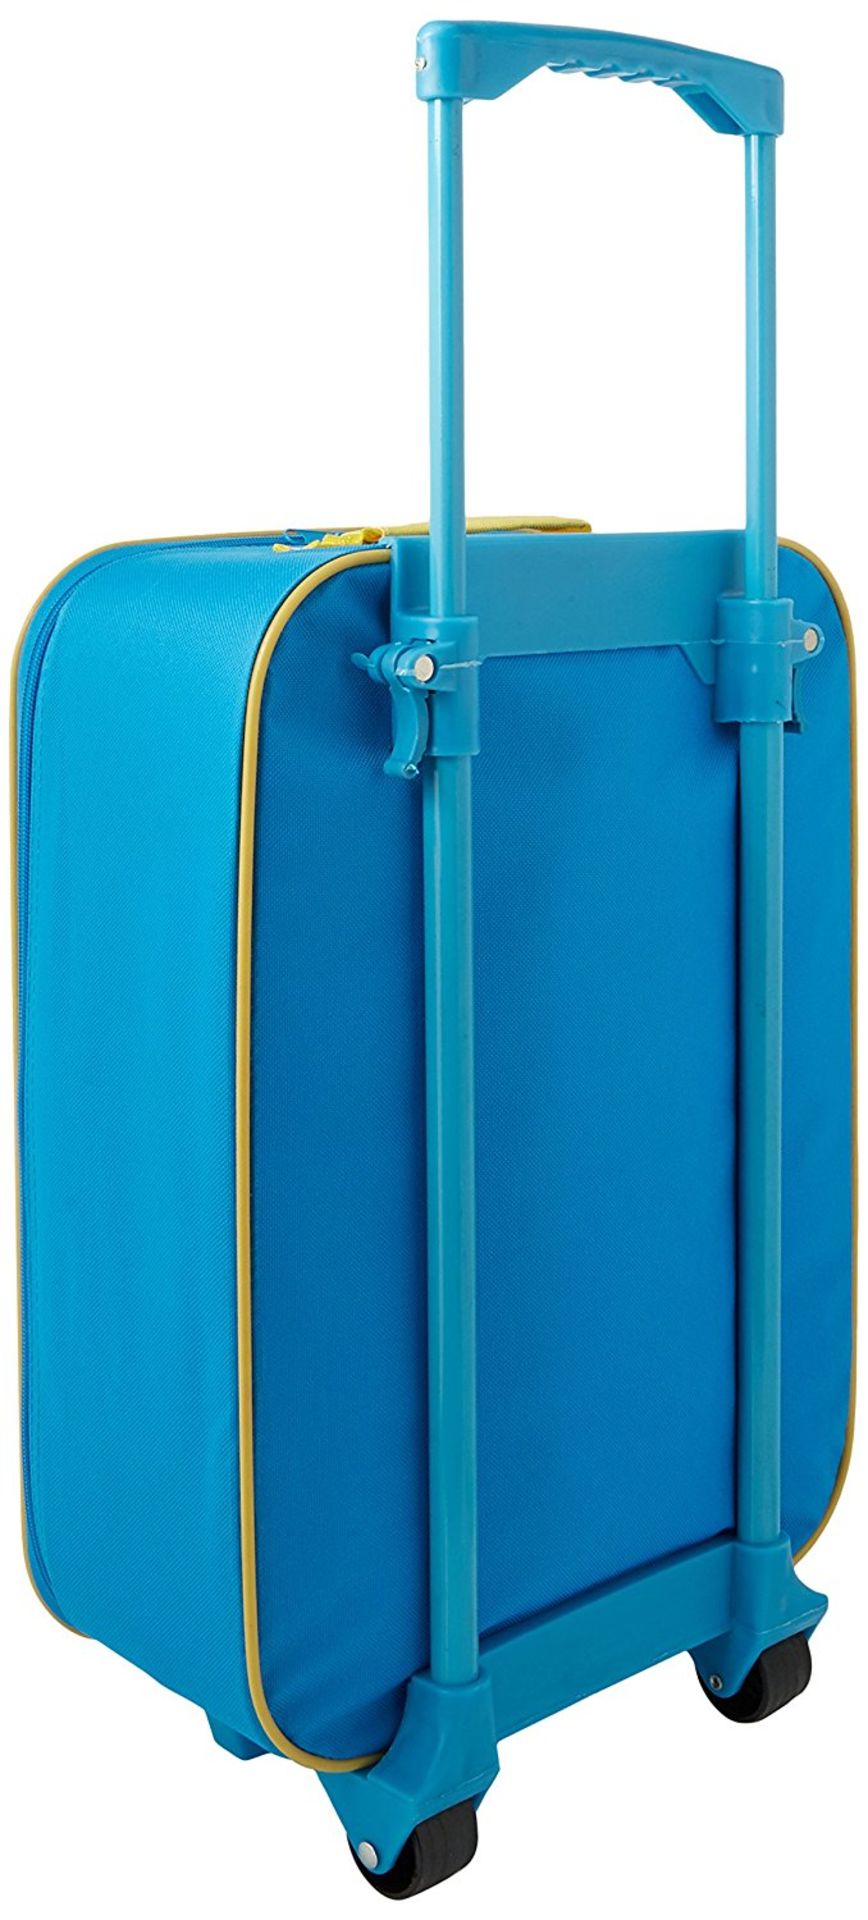 72 X Disney Finding Dory 3Pce Travel Trolley Luggage Set [Brand New In Retail Packaging] - Image 2 of 6